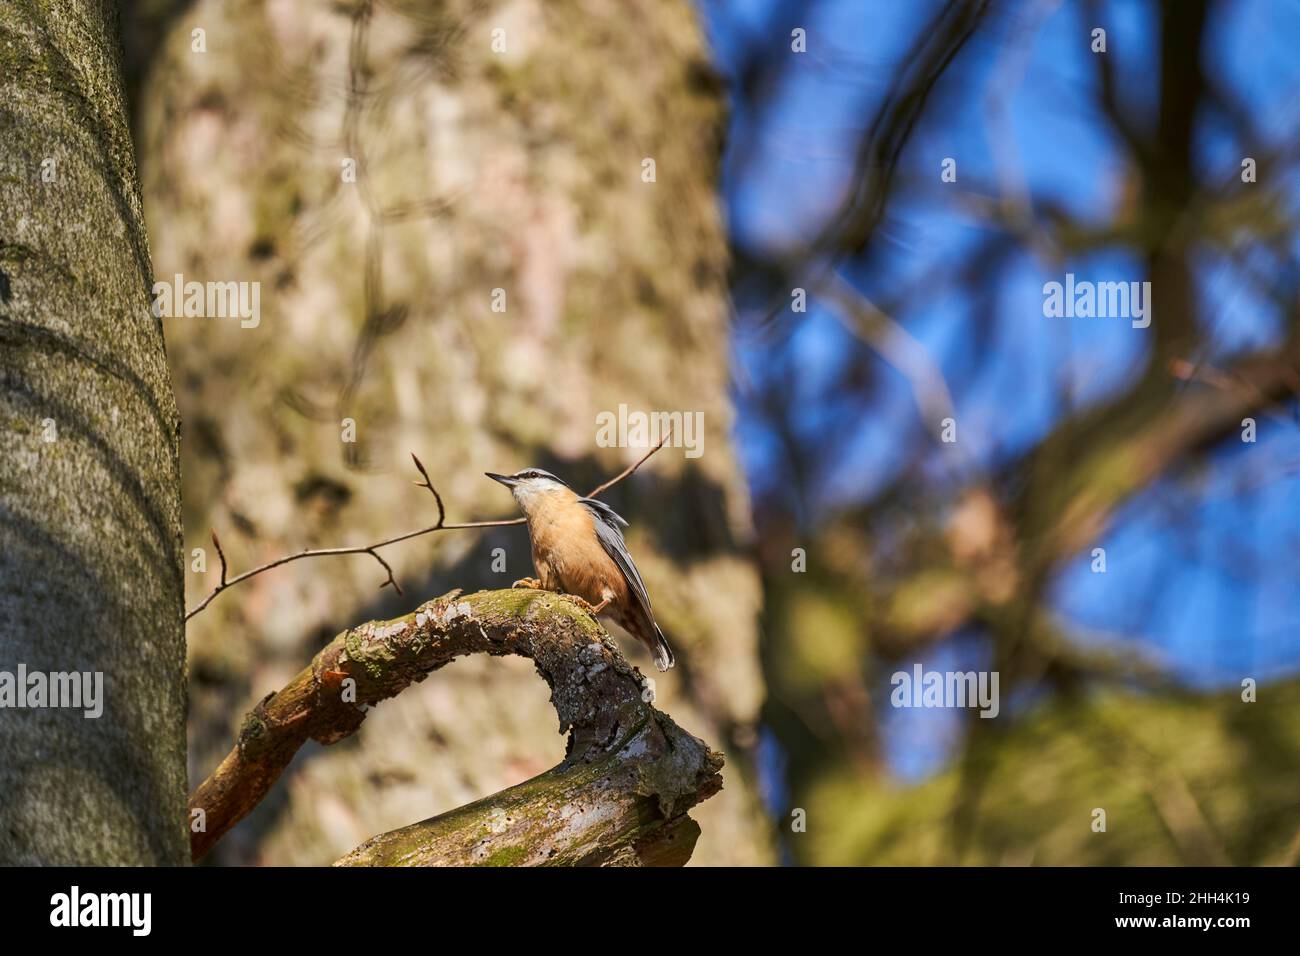 The Eurasian nuthatch or wood nuthatch, Sitta europae, is a small passerine bird short tailed bird with a long bill, blue grey upperparts and a black Stock Photo